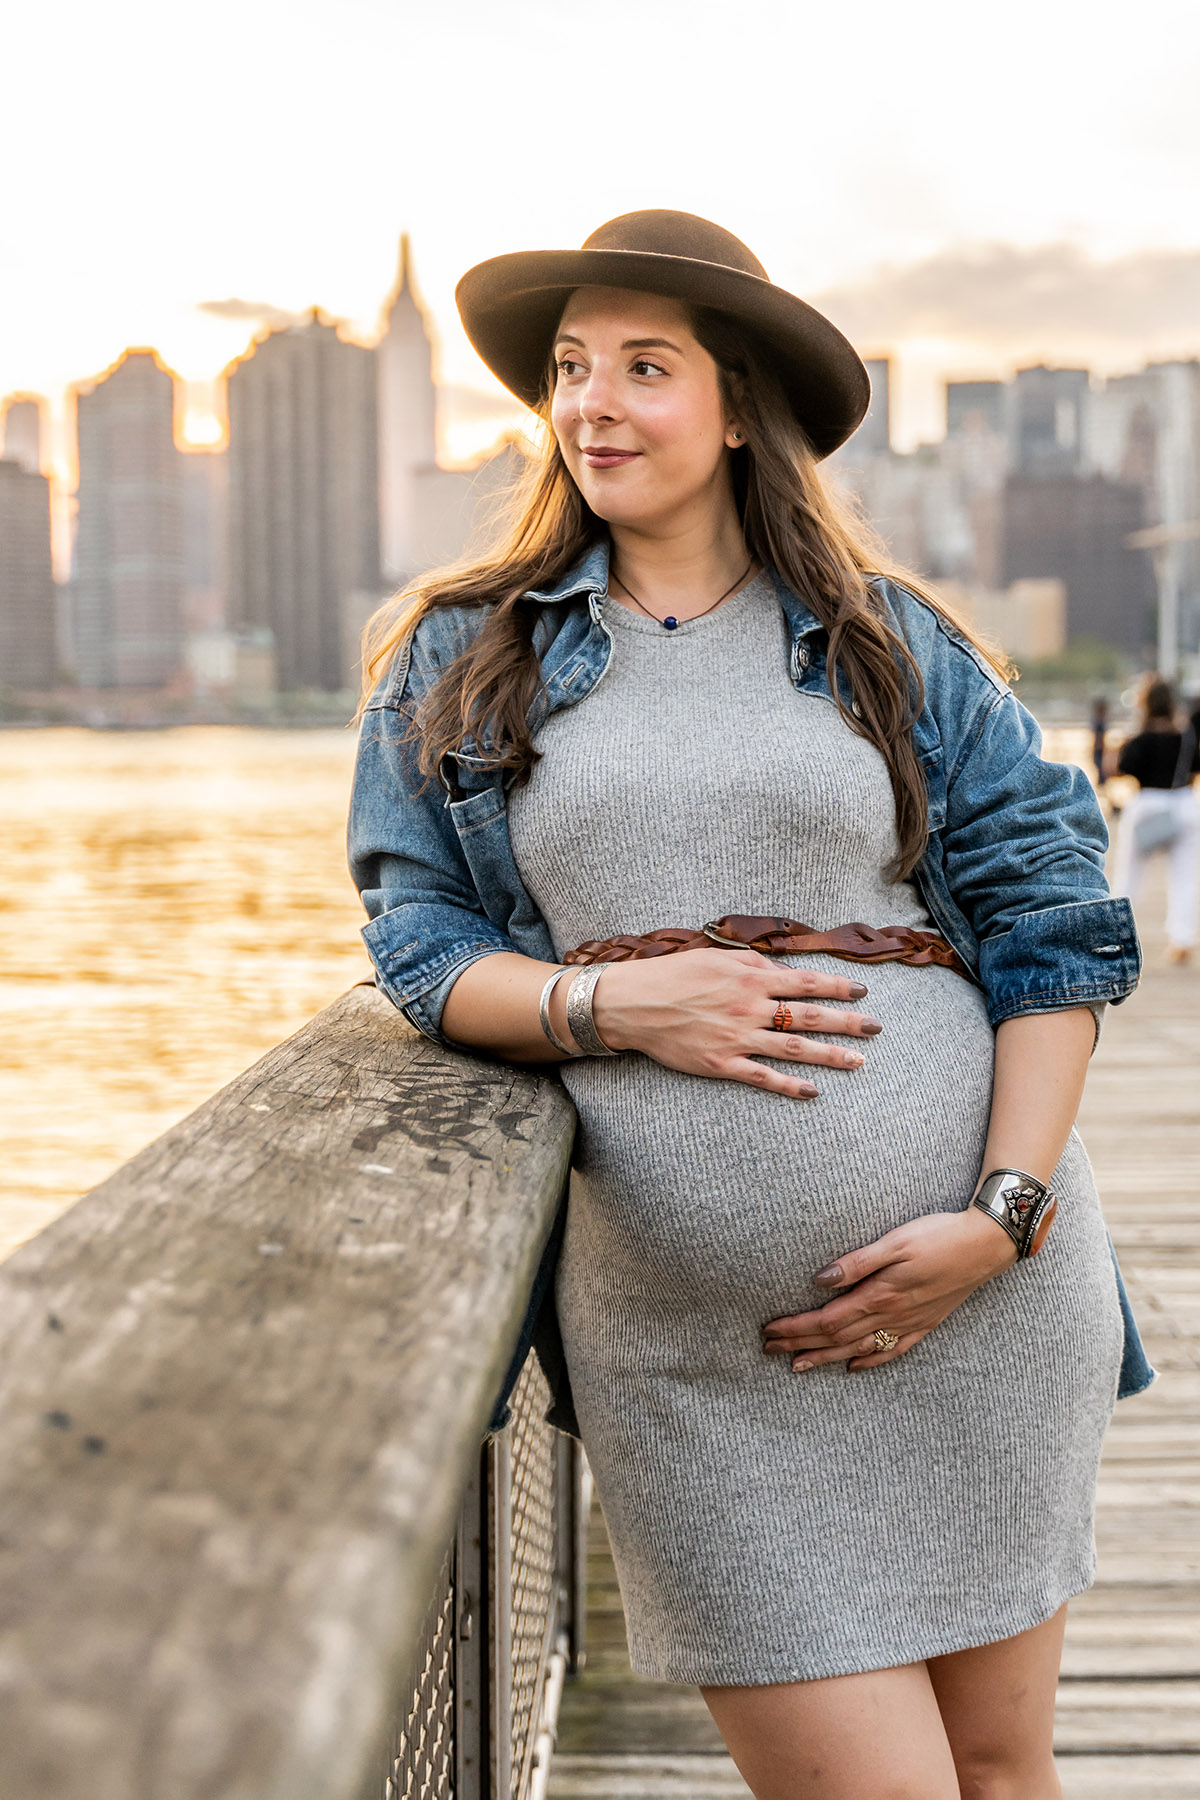 pregnant woman with hat on in queens with nyc skyline